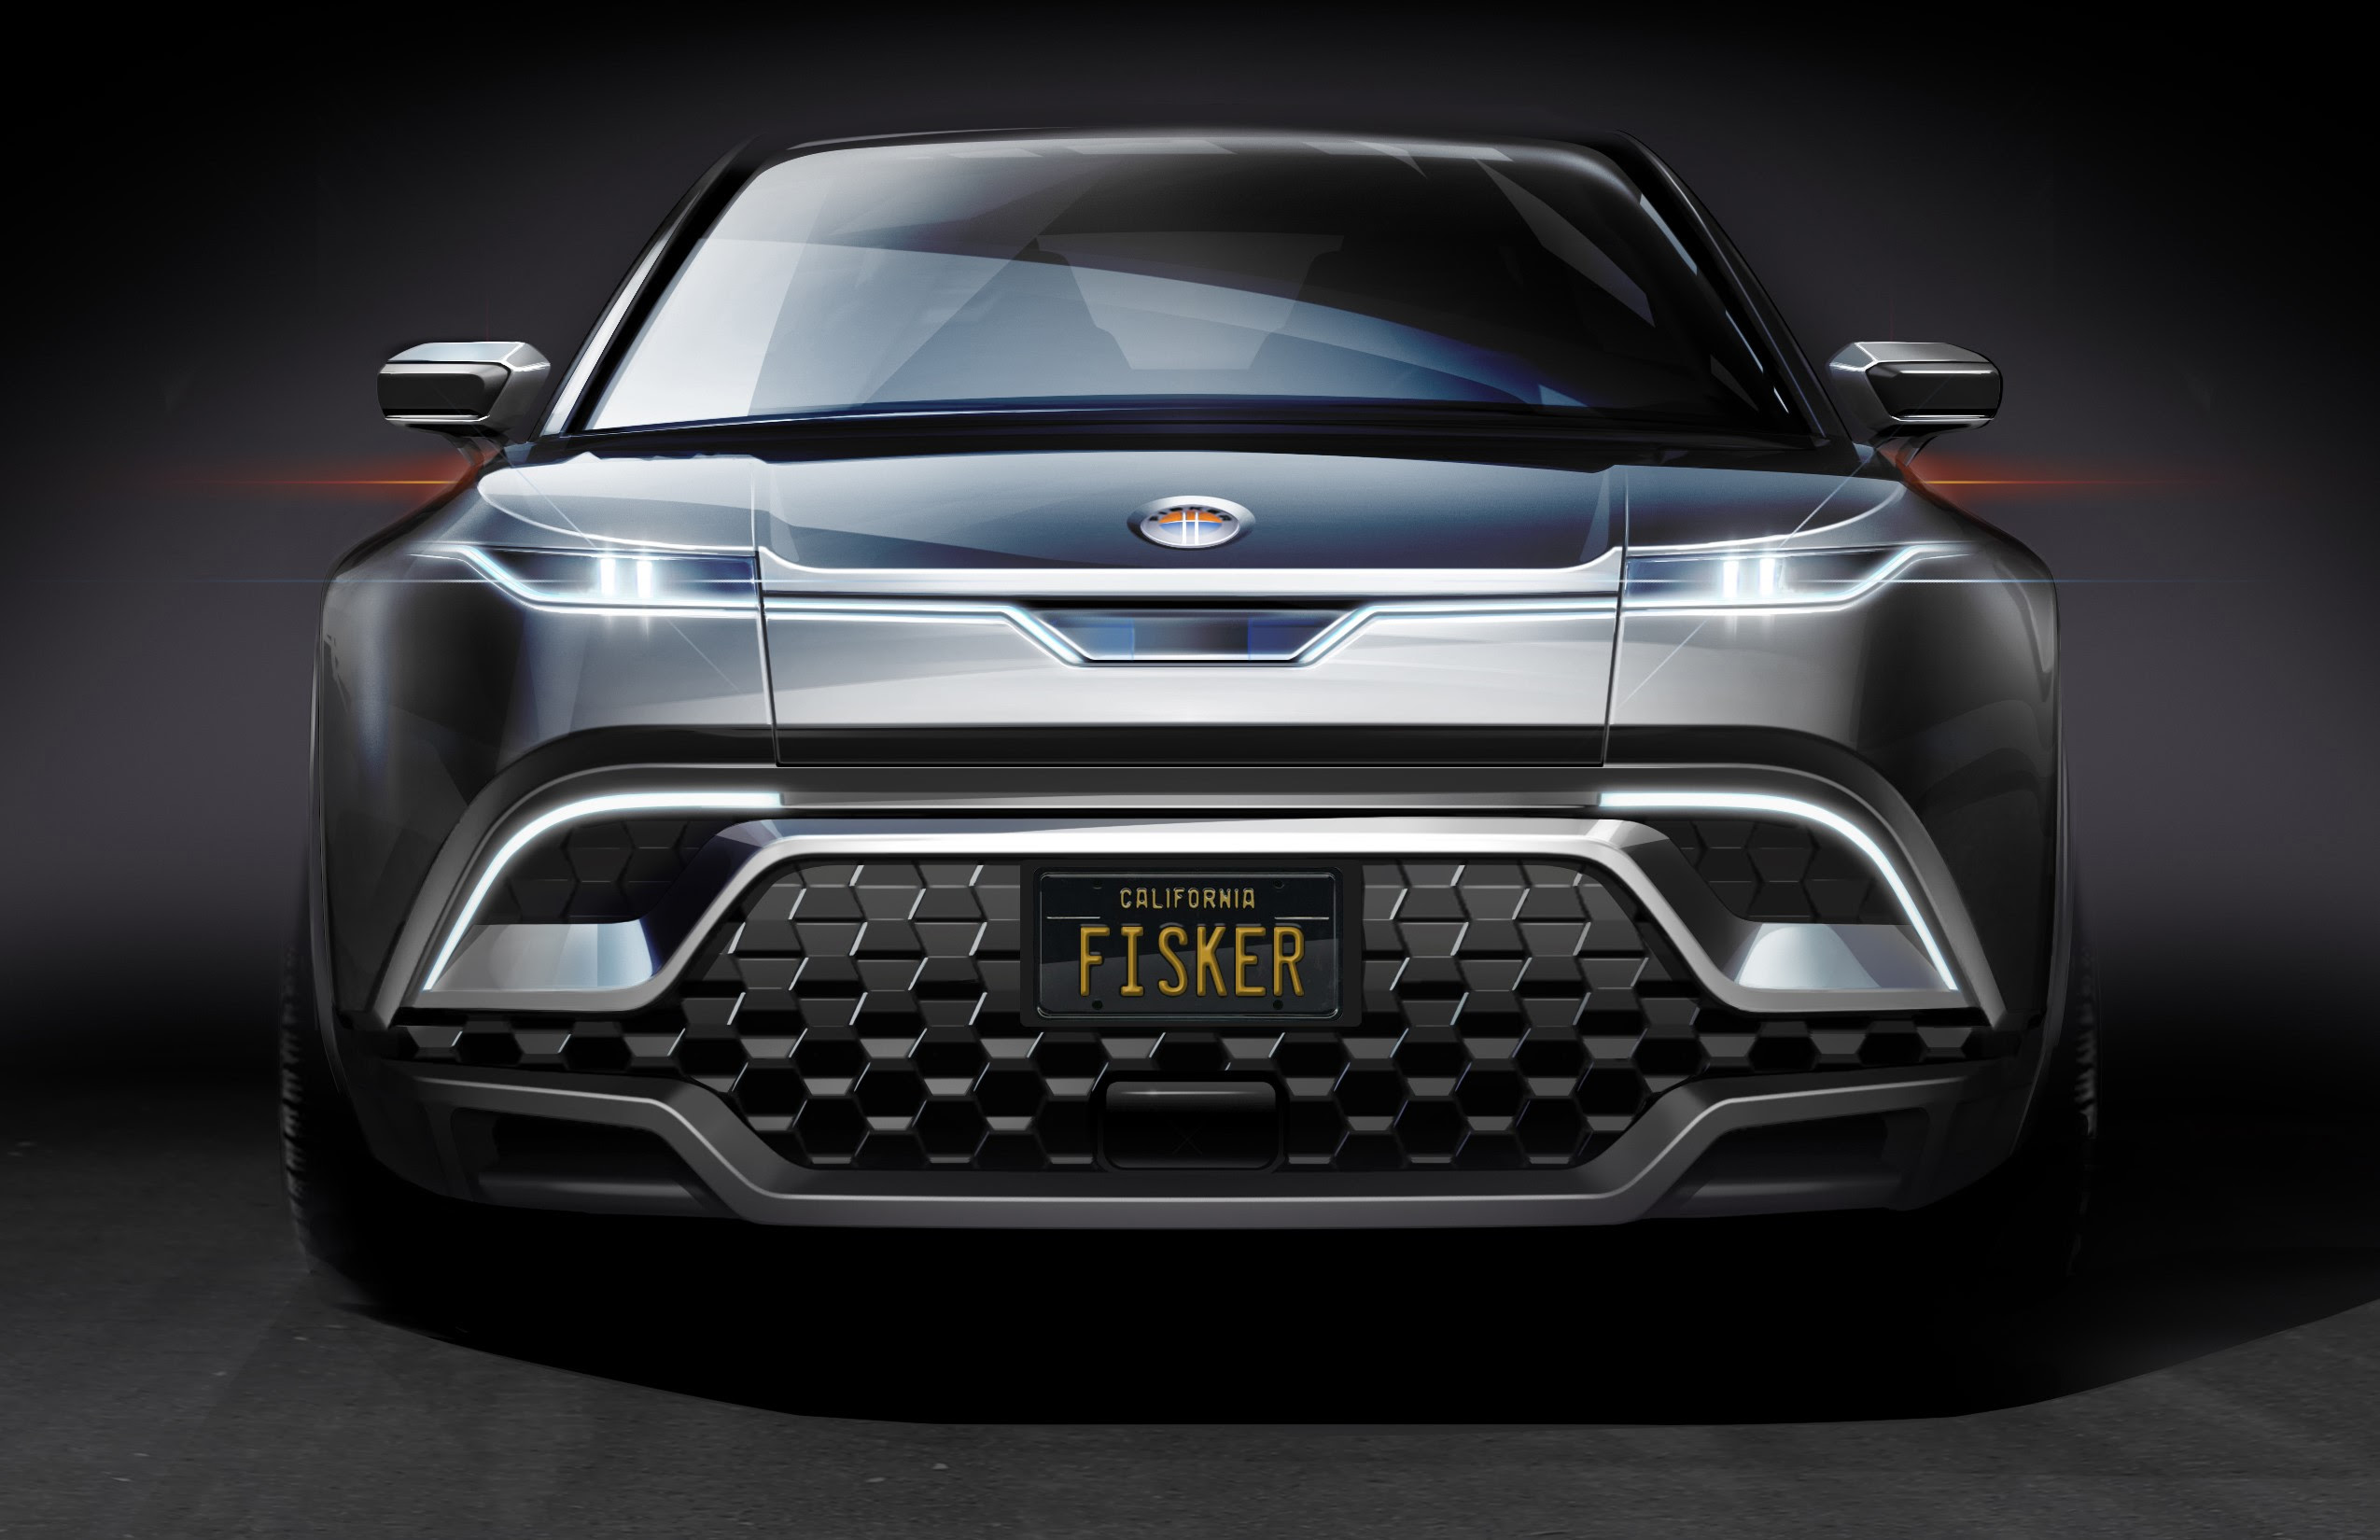 80 kwh lithium-ion battery. All-electric SUV from Fisker